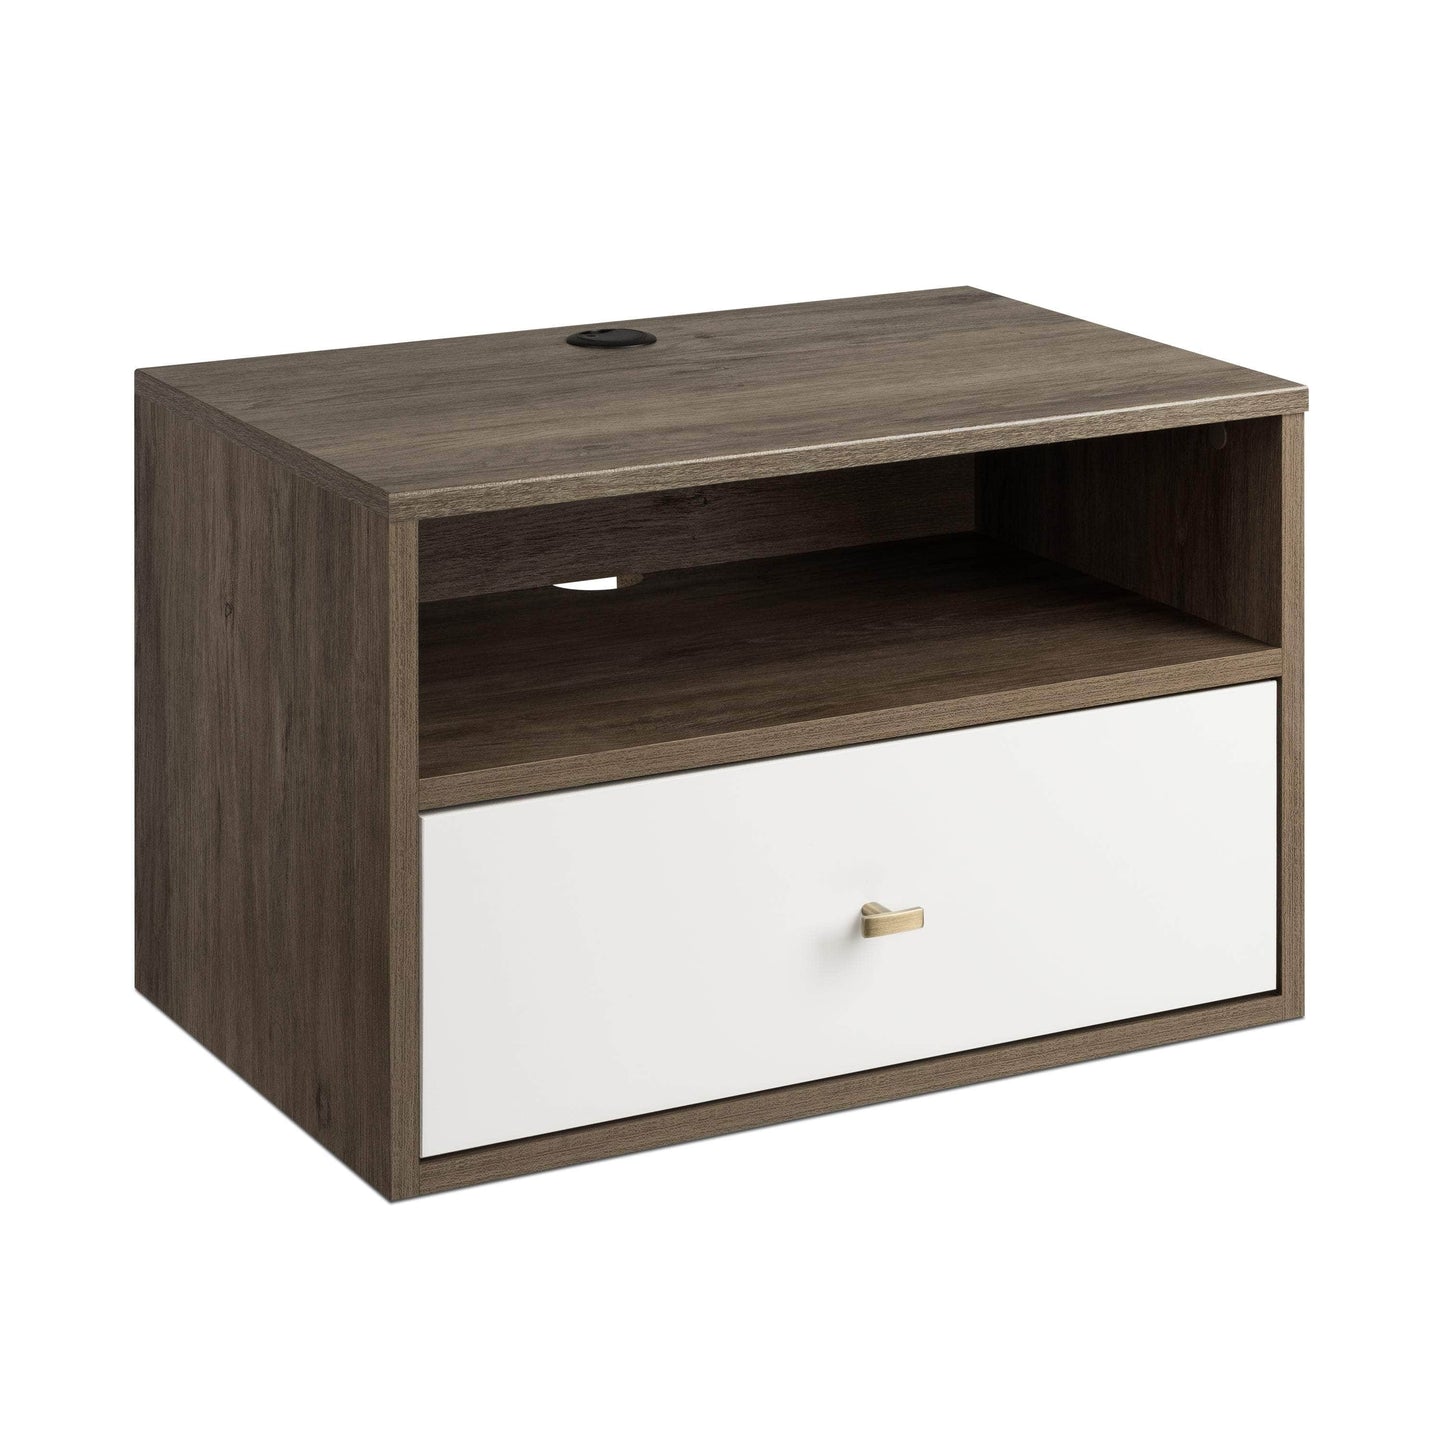 Pending - Modubox Nightstands Drifted Gray and White Floating Nightstand With Open Shelf - Available in 4 Colours